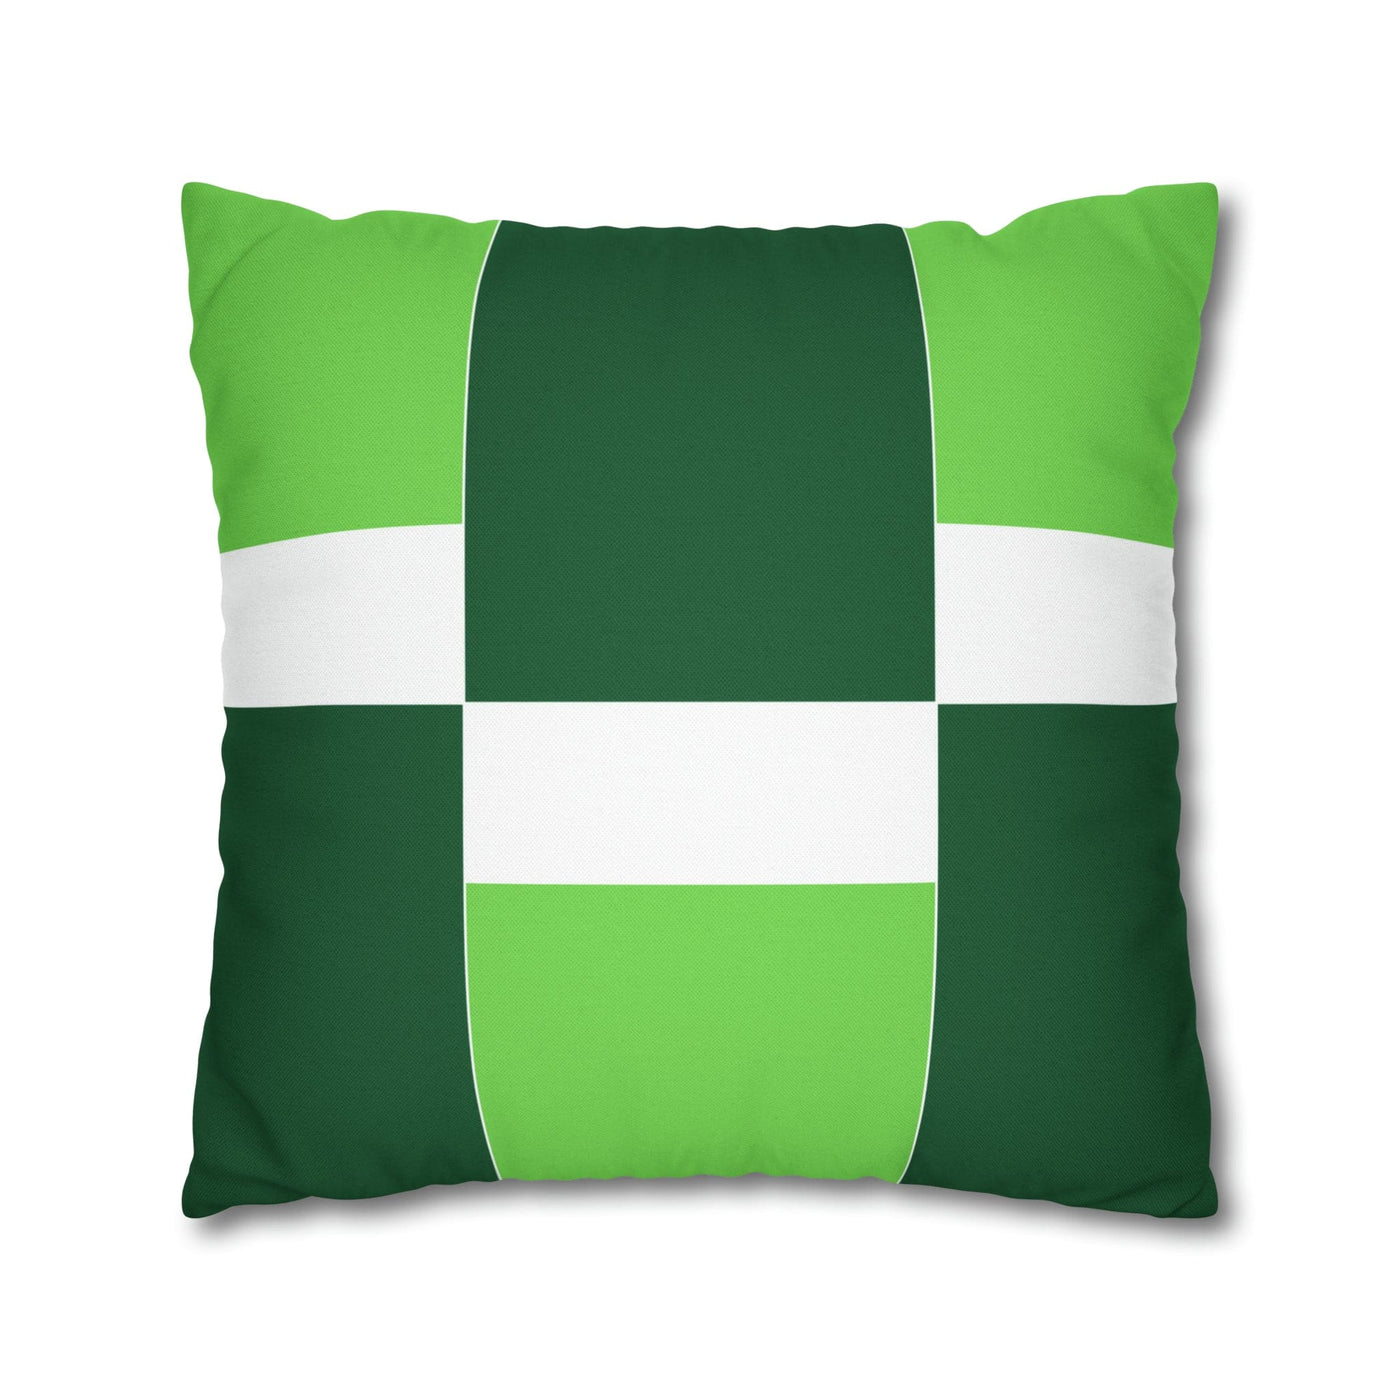 Decorative Throw Pillow Covers With Zipper - Set Of 2 Lime Forest Irish Green